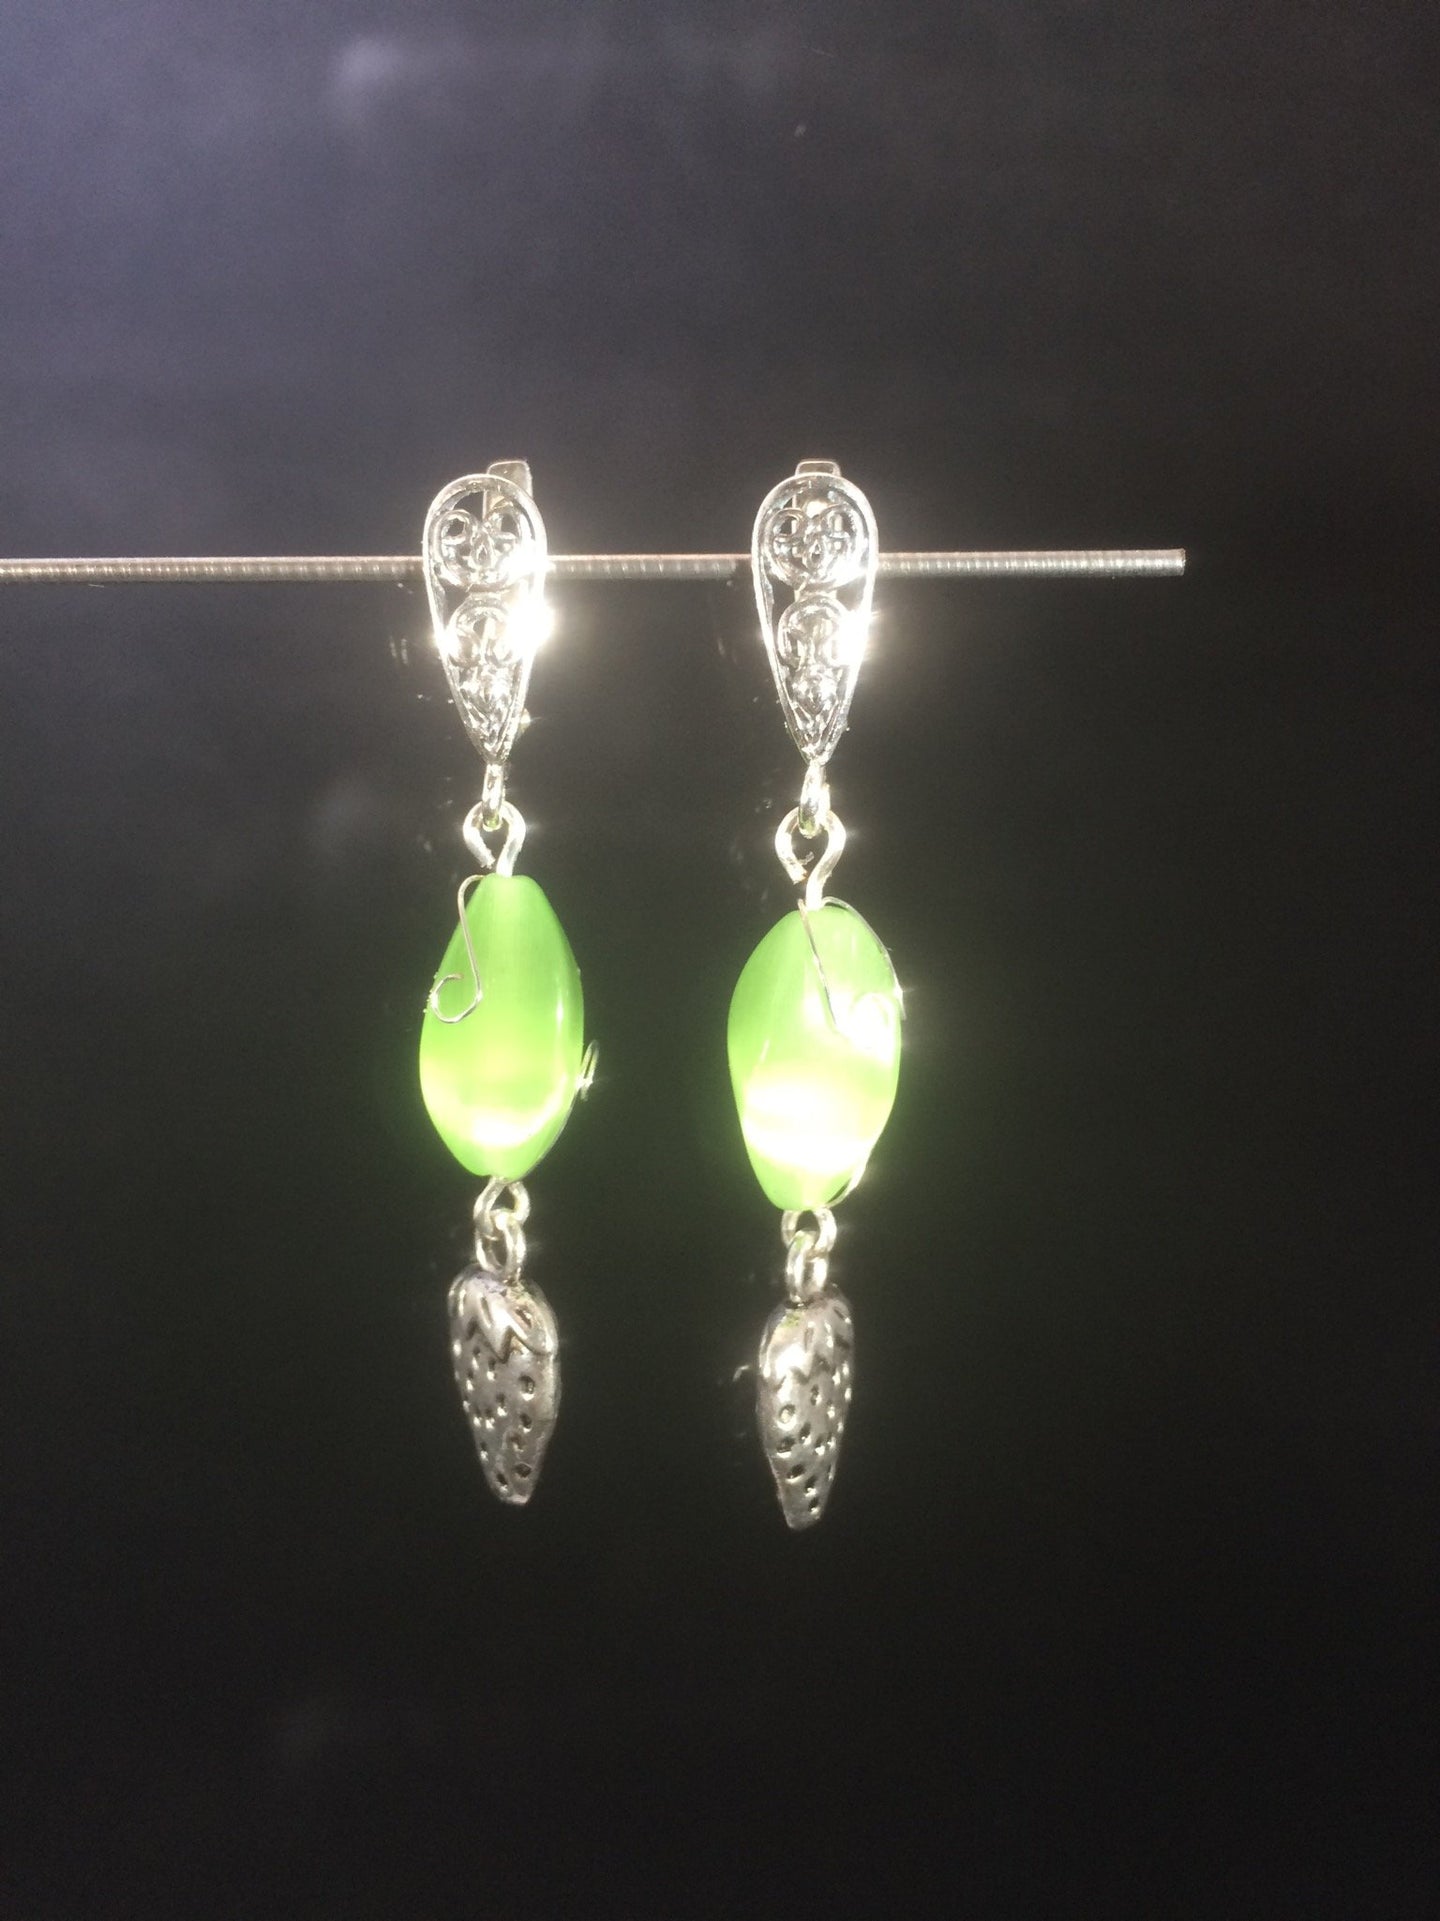 Tiny metal strawberry charms dangle from chatoyant green glass beads below silver plated brass leverbacks in these 1.5